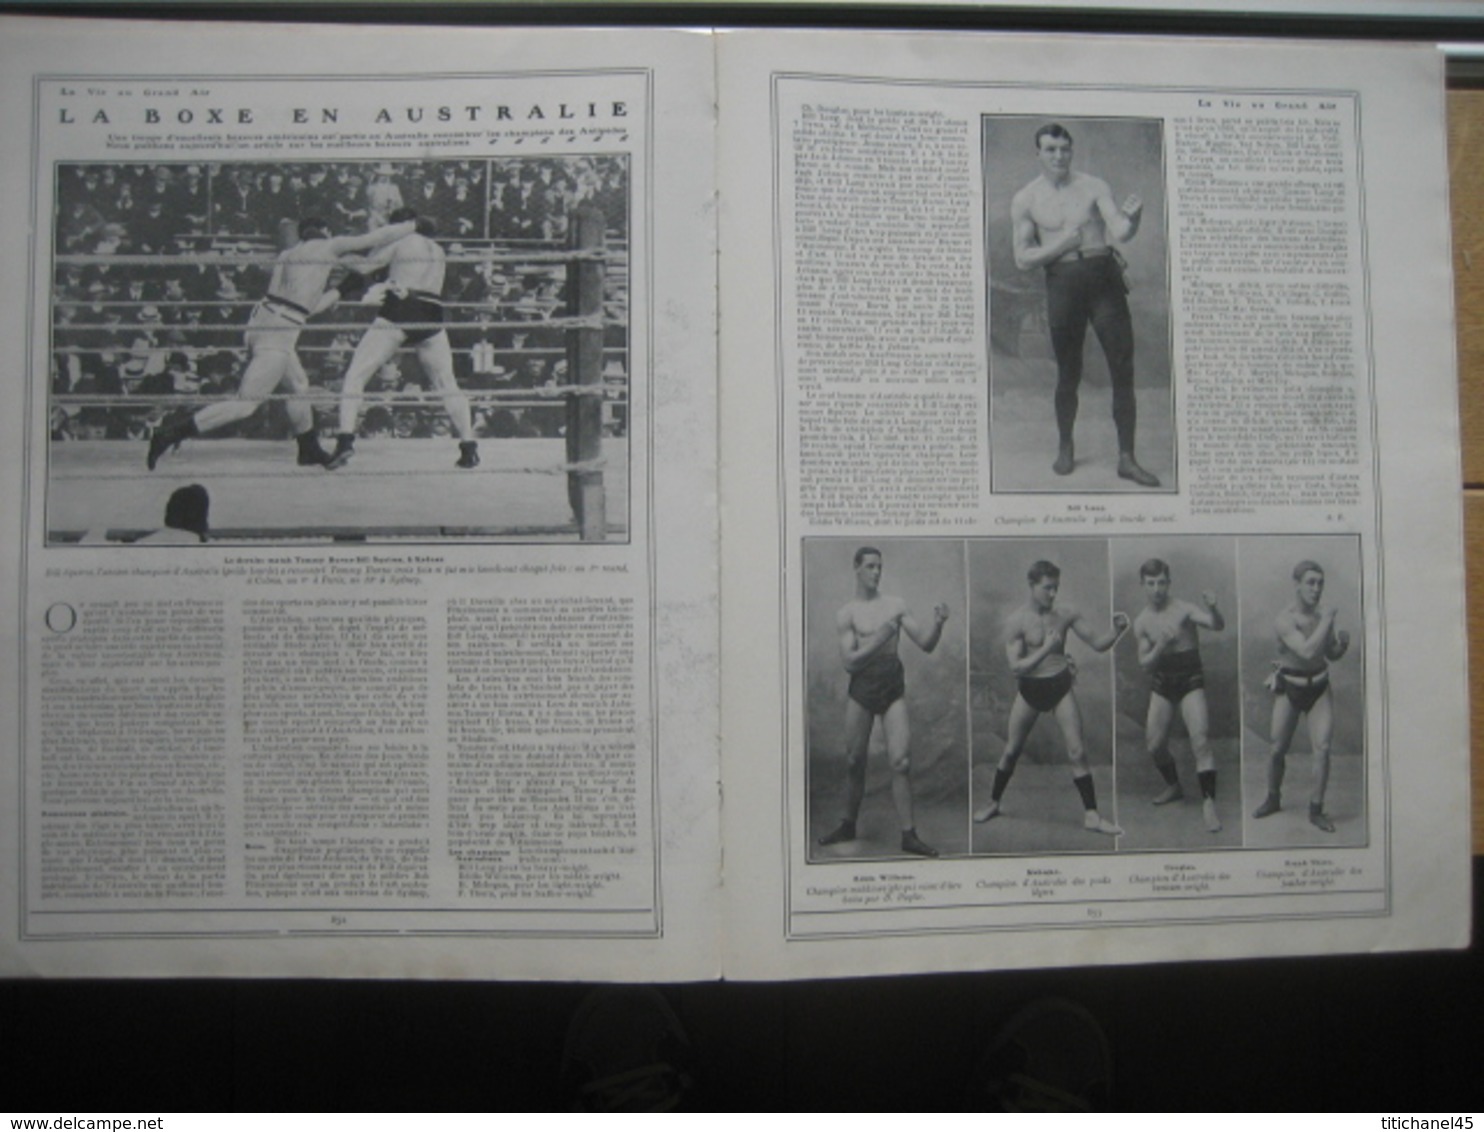 1910 LECAGNEUX-MARTINET-LATHAM-GRAHAME WHITE-LEBLANC/BOXE : Tommy BURNS-Bill SQUIRES/RUGBY :MATCH R.C.F. contre S.C.U.F.